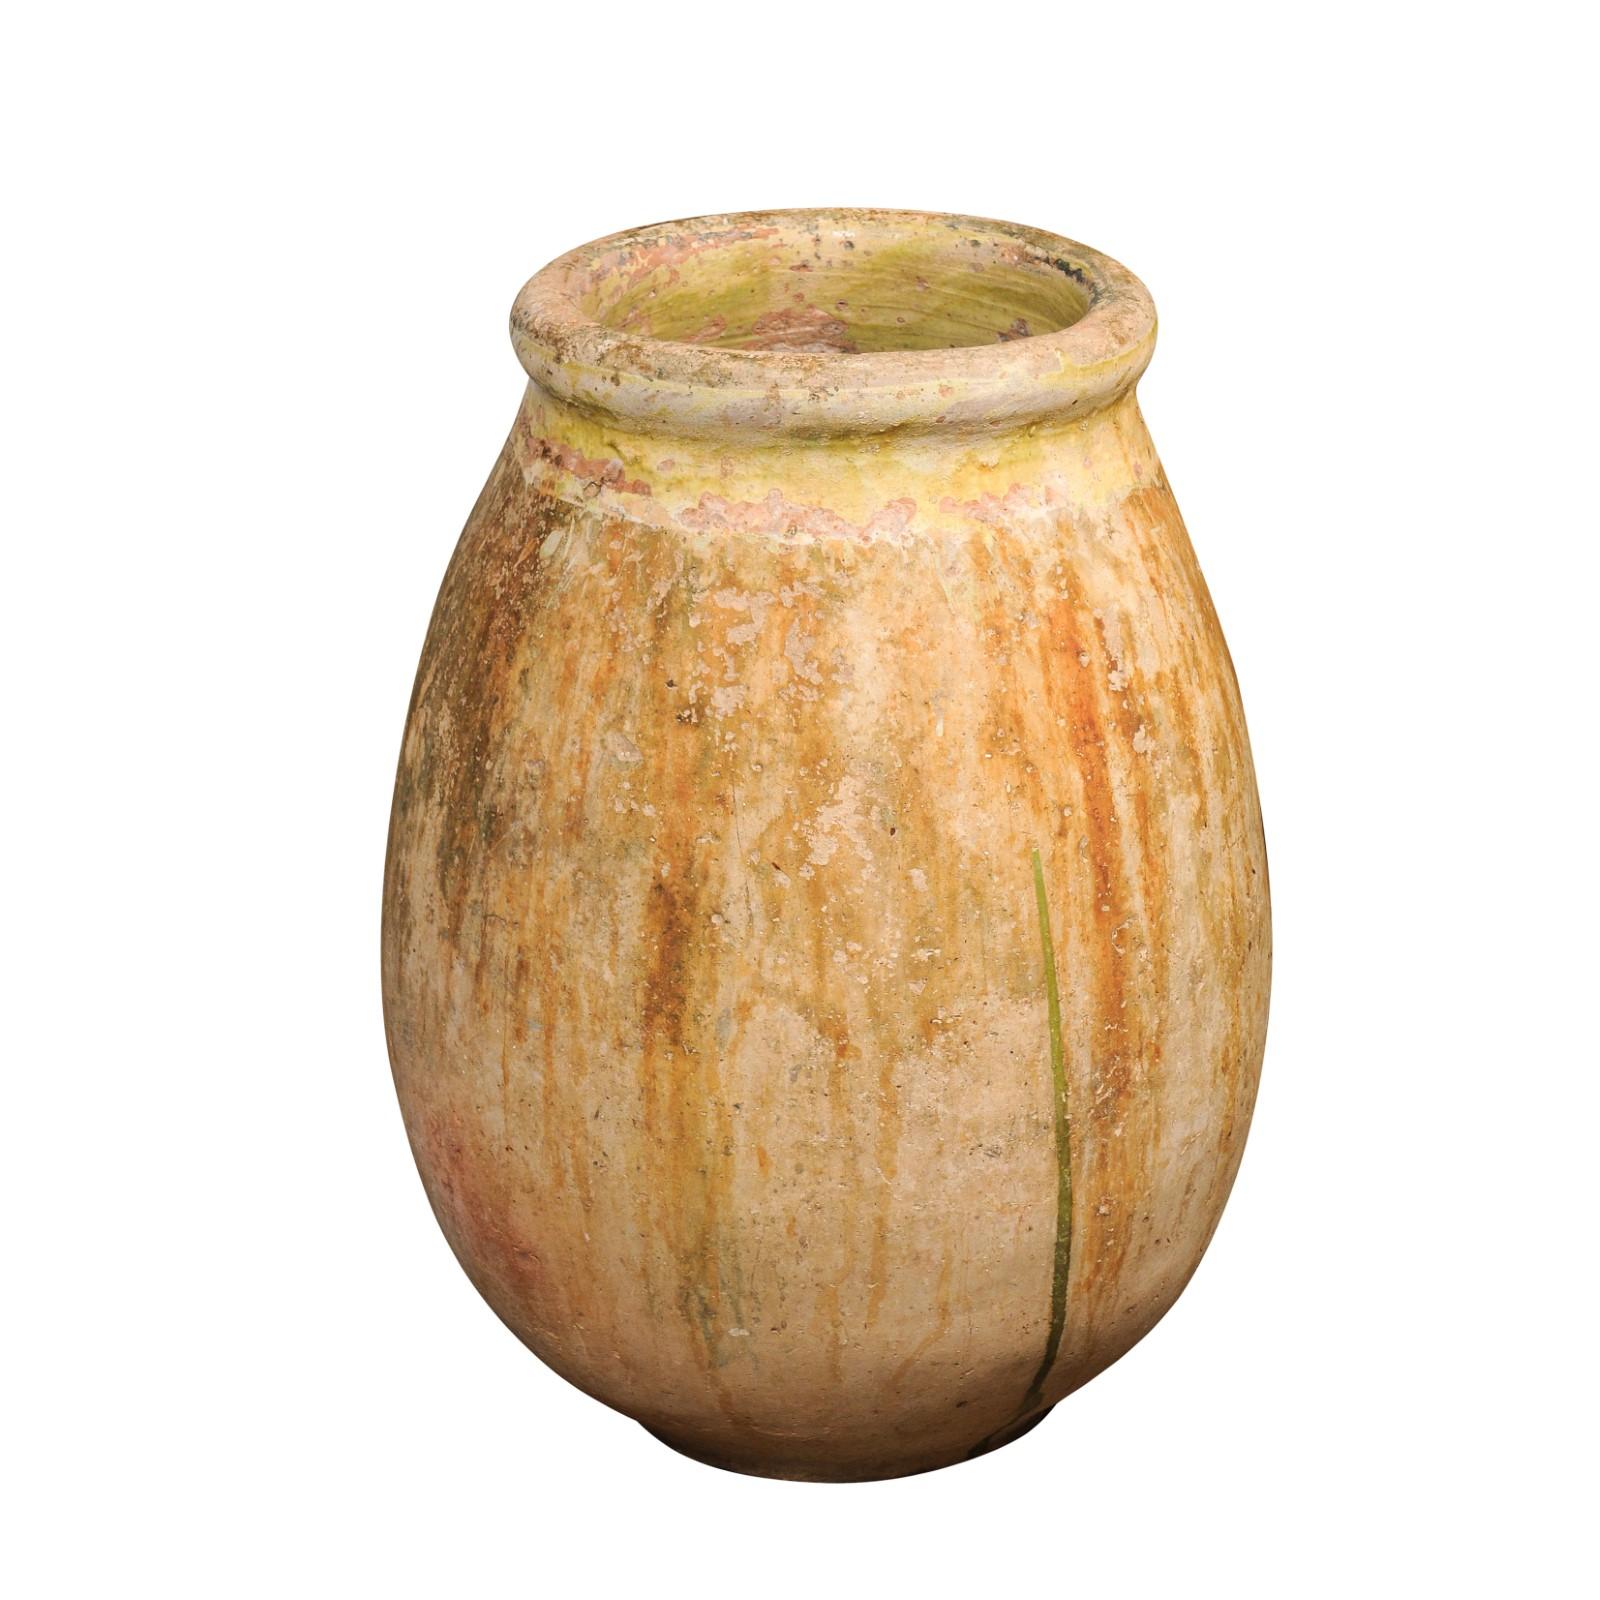 A large size French Provincial terracotta olive oil Biot jar from Provence with traces of yellow glaze and green dripping from the 19th century. A magnificent large-sized French Provincial terracotta olive oil Biot jar from the 19th century, hailing